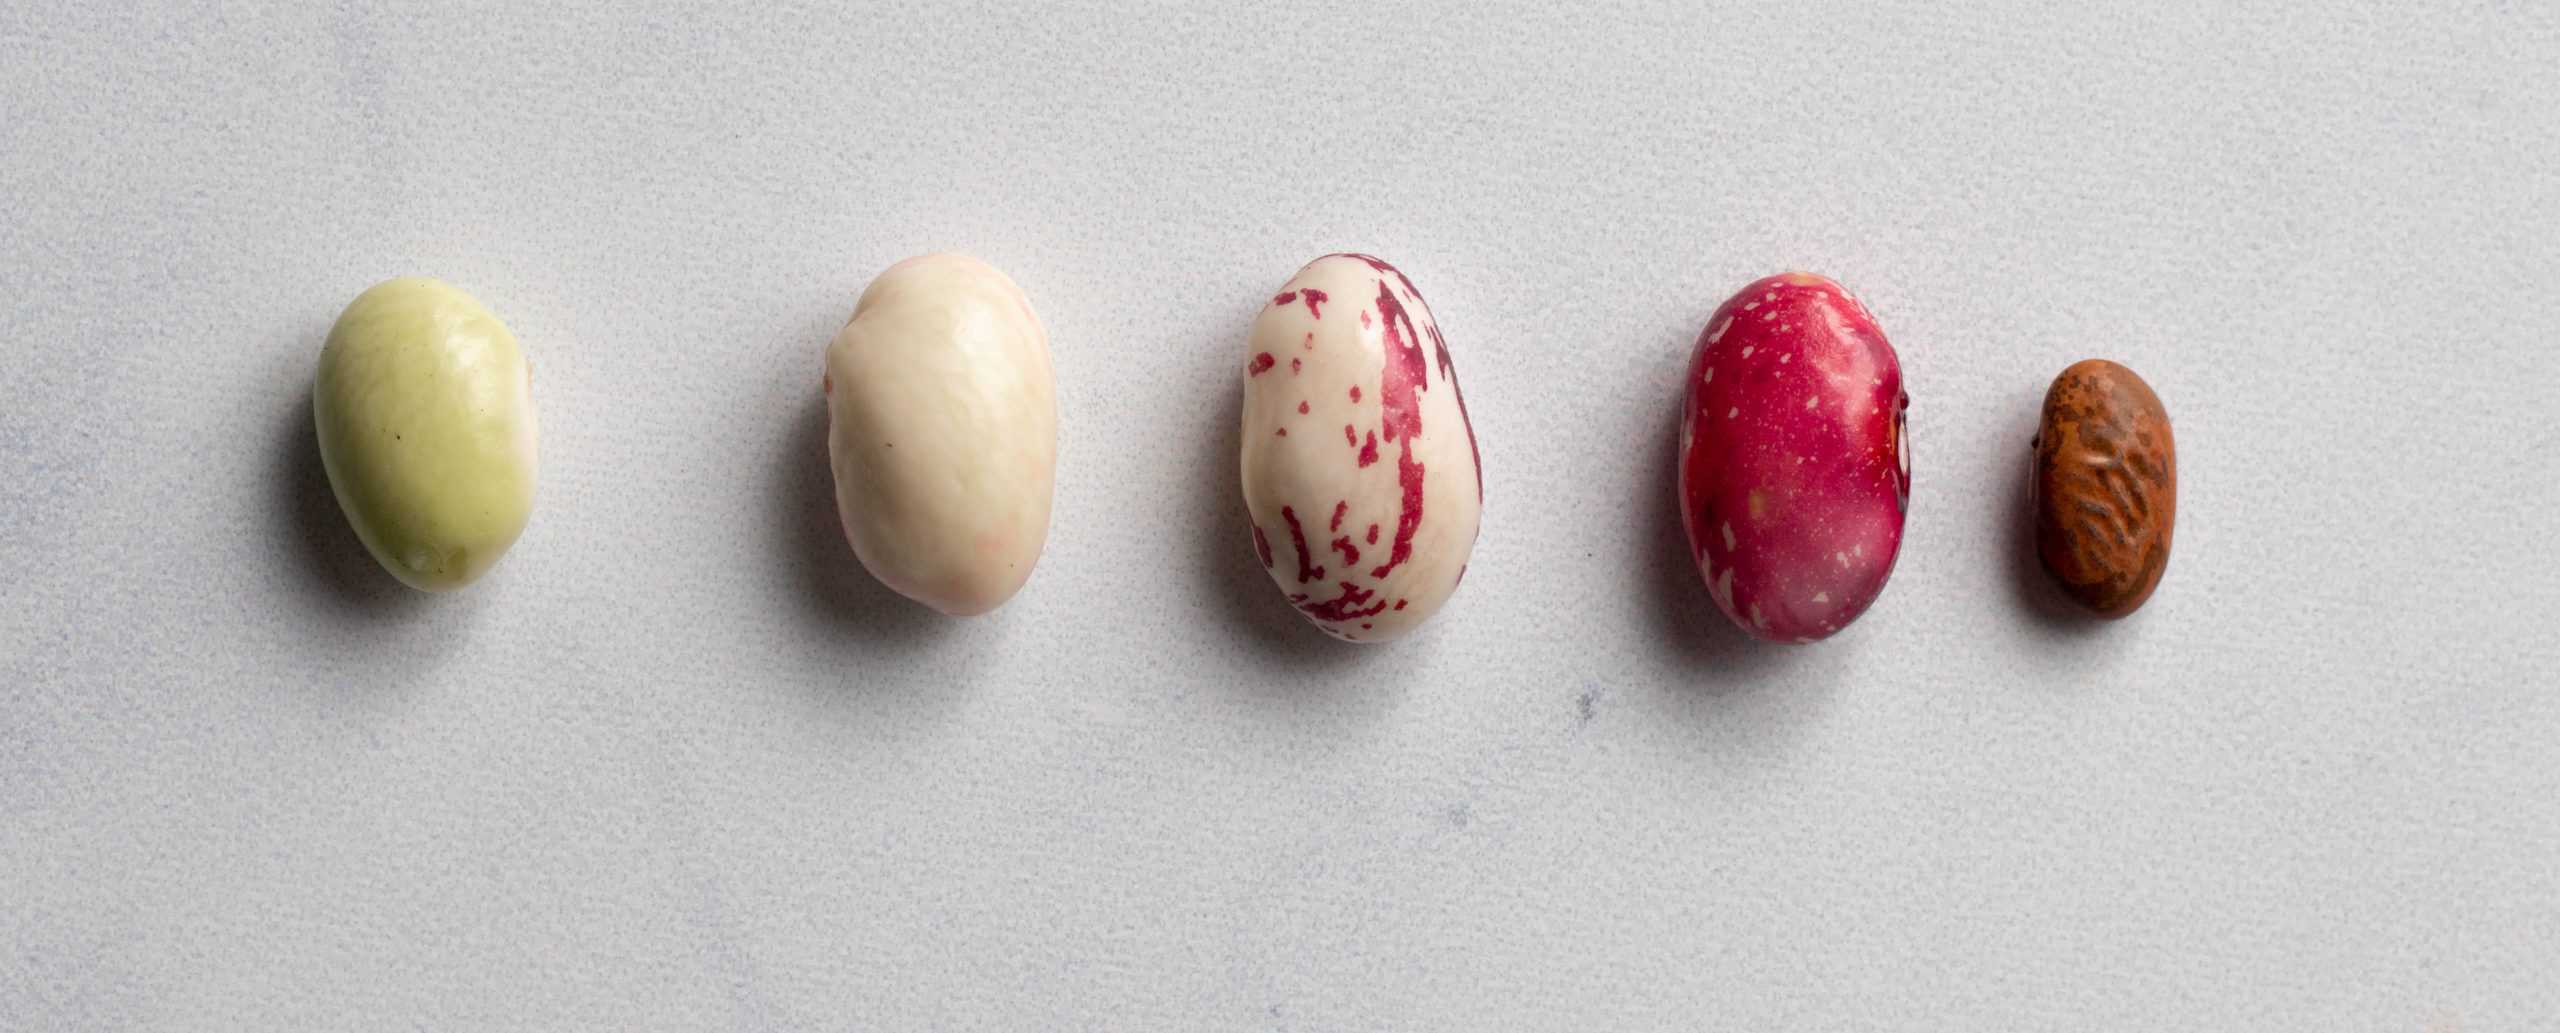 different stage of borlotti beans from immature to dried